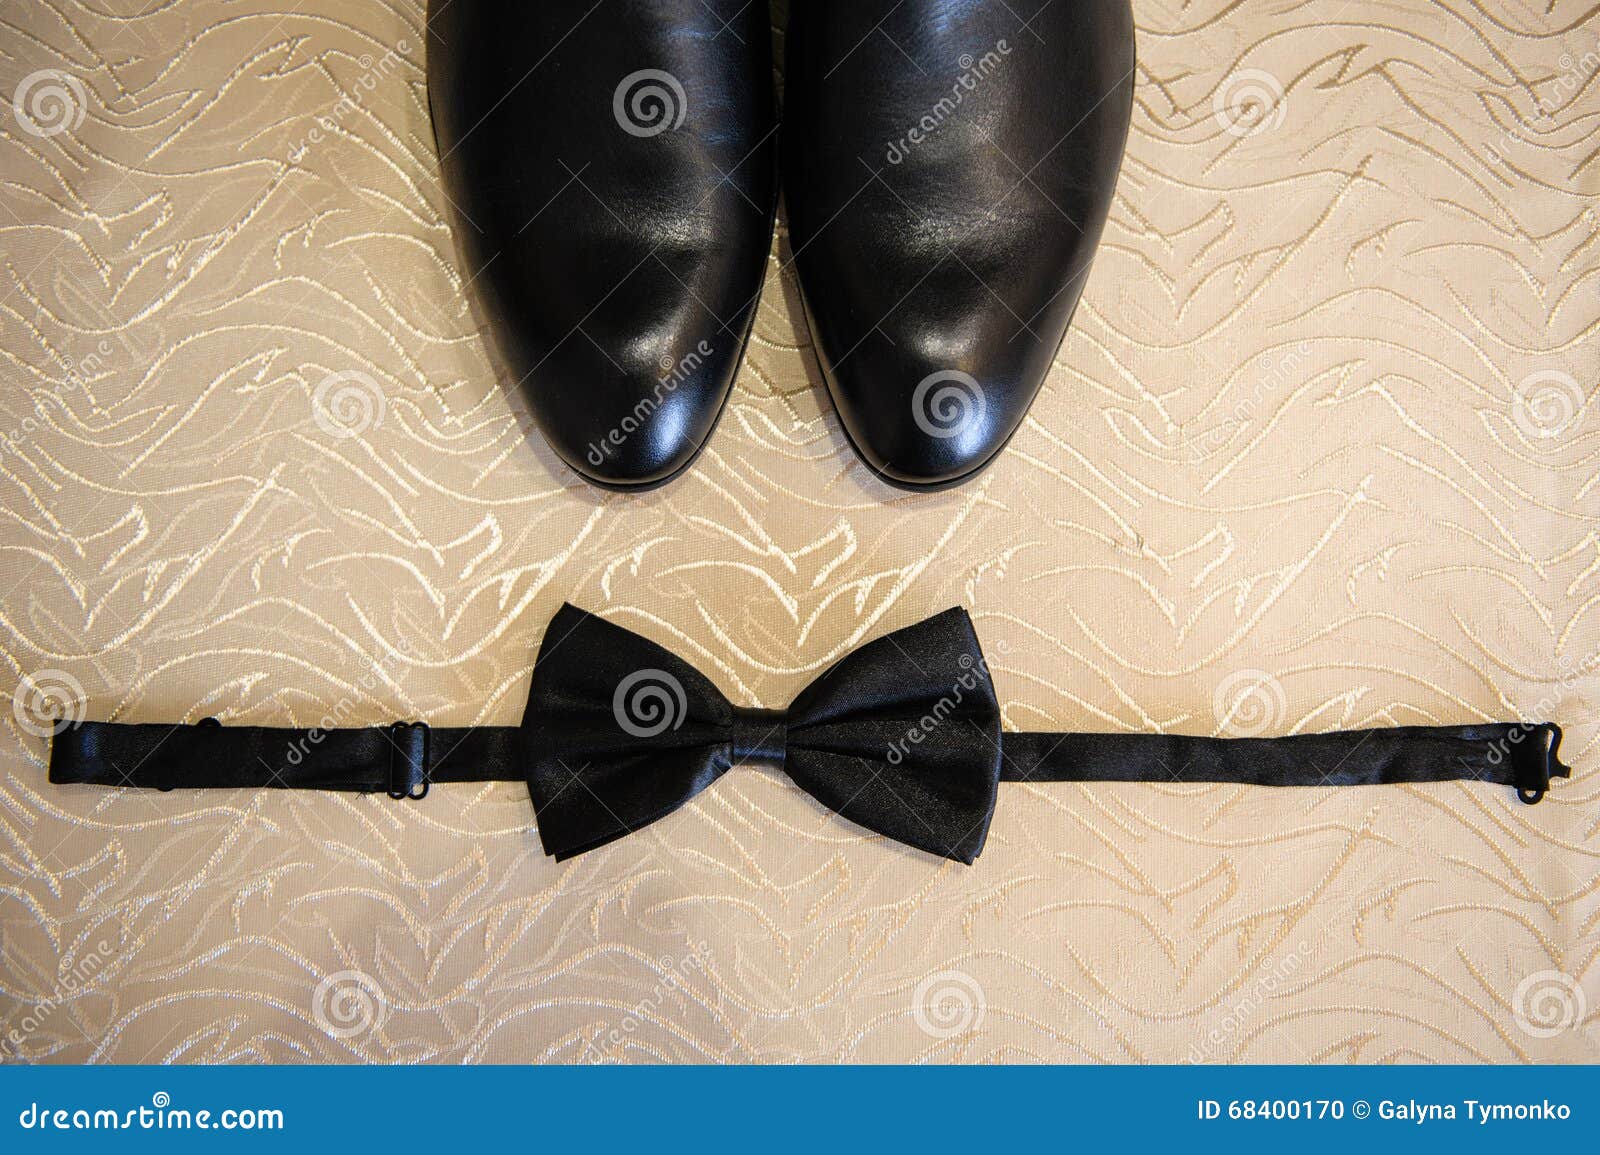 Shoes and Bow Tie Lying on the Wooden Floor Stock Photo - Image of ...